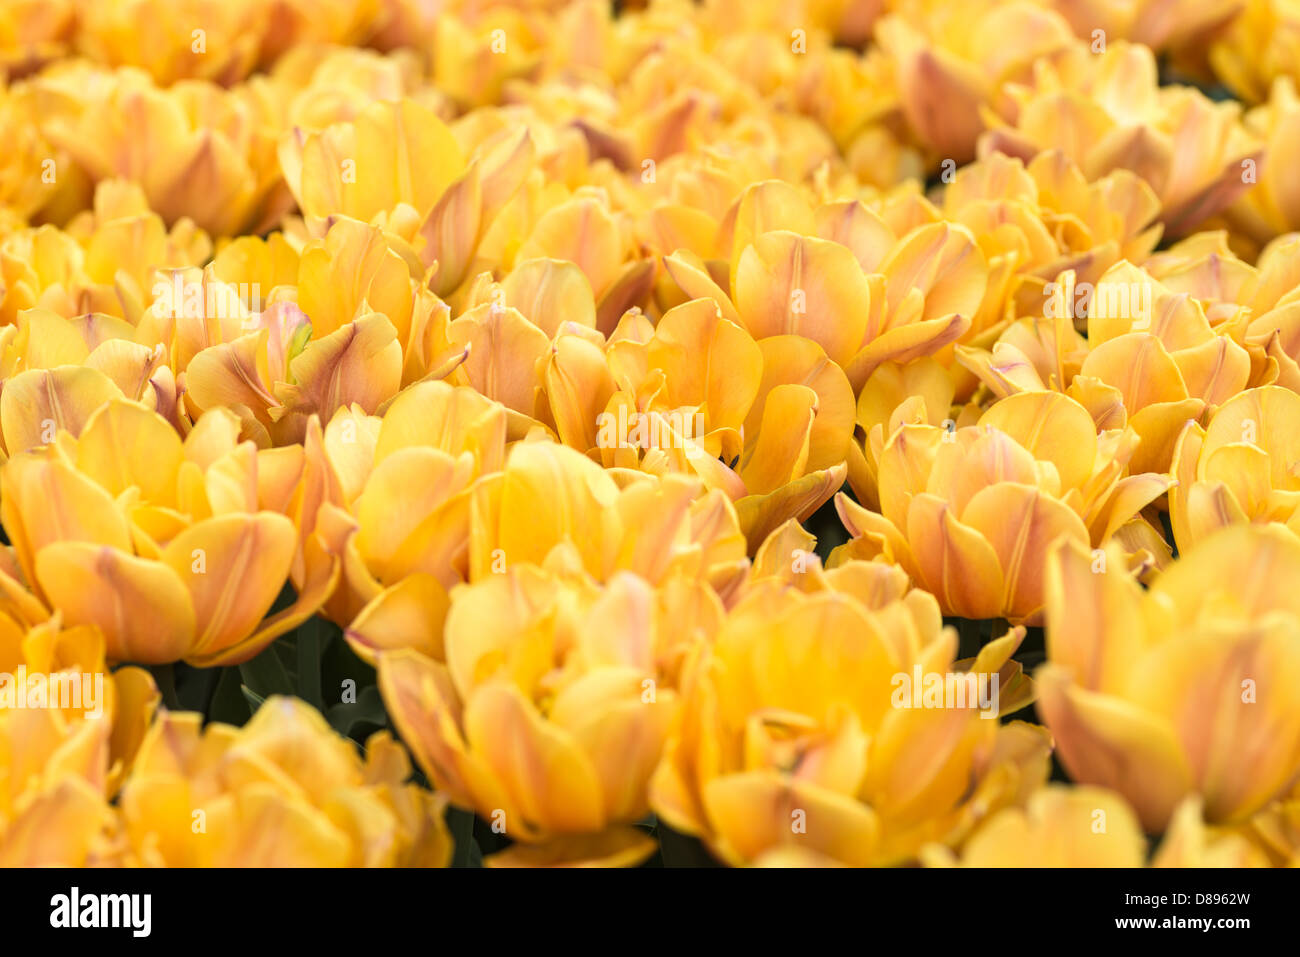 Flowers: group of fresh yellow tulips on flowerbed. Nice floral abstract background Stock Photo